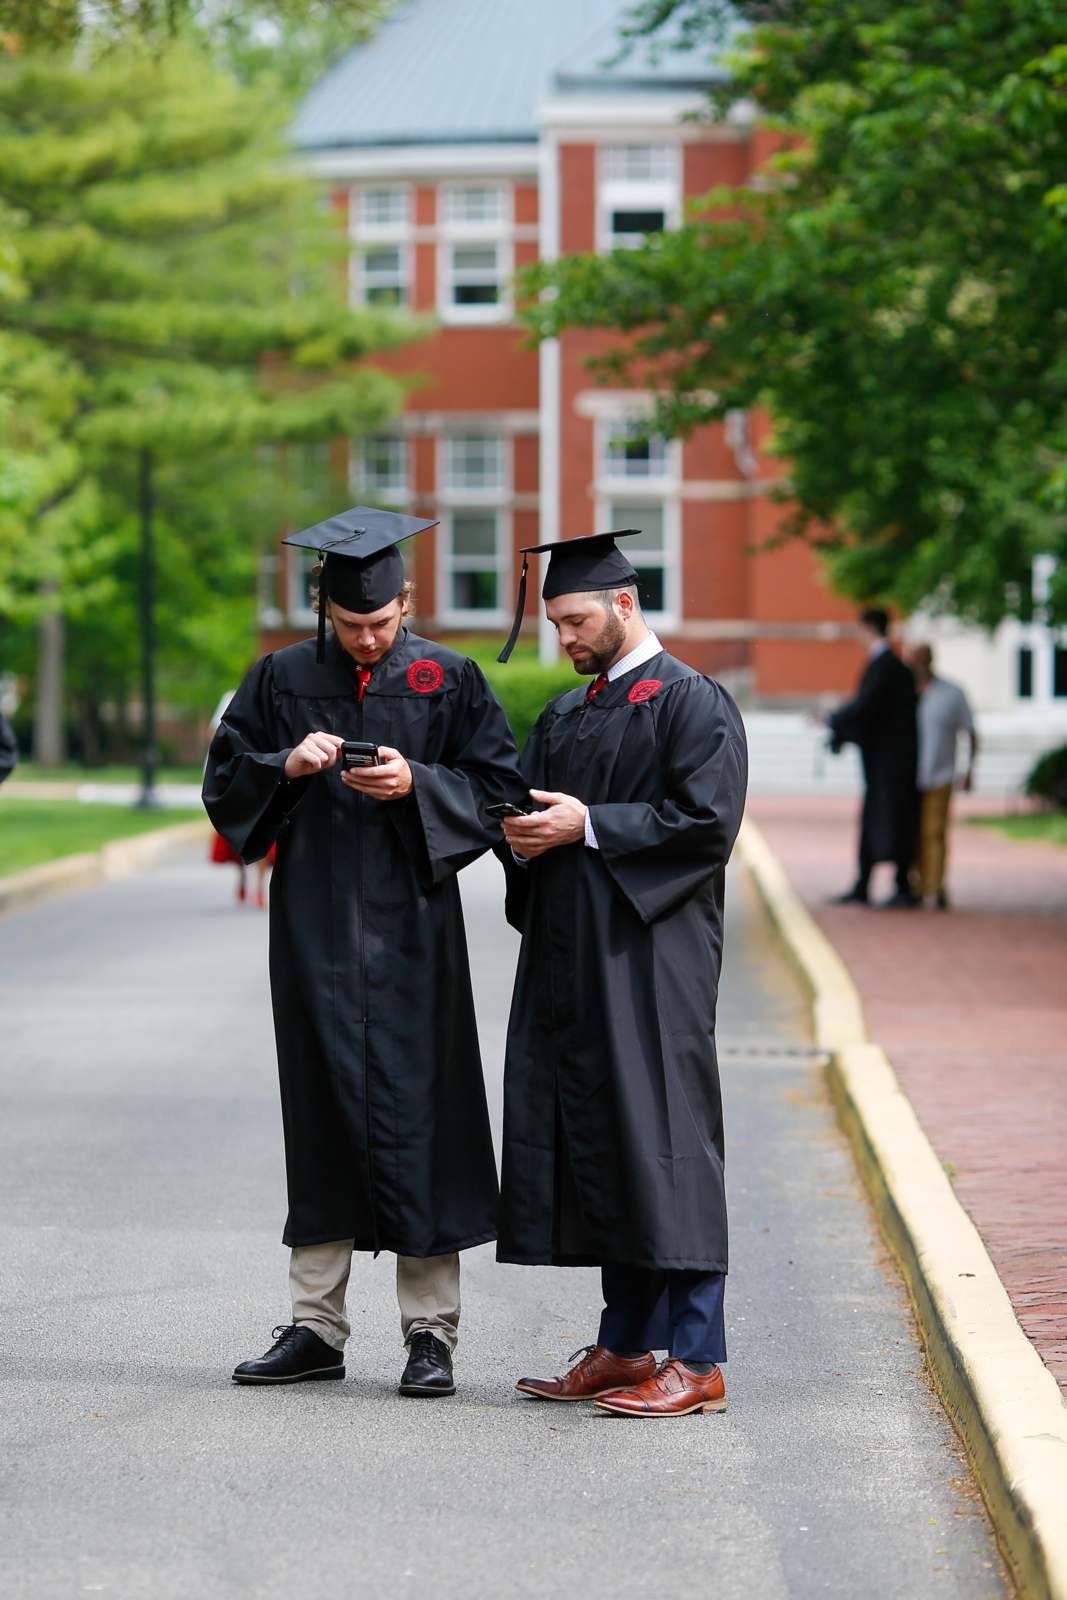 Free Photos - This Stock Photo Captures Two Young Men In Cap And Gowns, Who  Have Just Graduated From The University Of Wisconsin-Madison. They Are  Standing Side By Side, Proudly Displaying Their